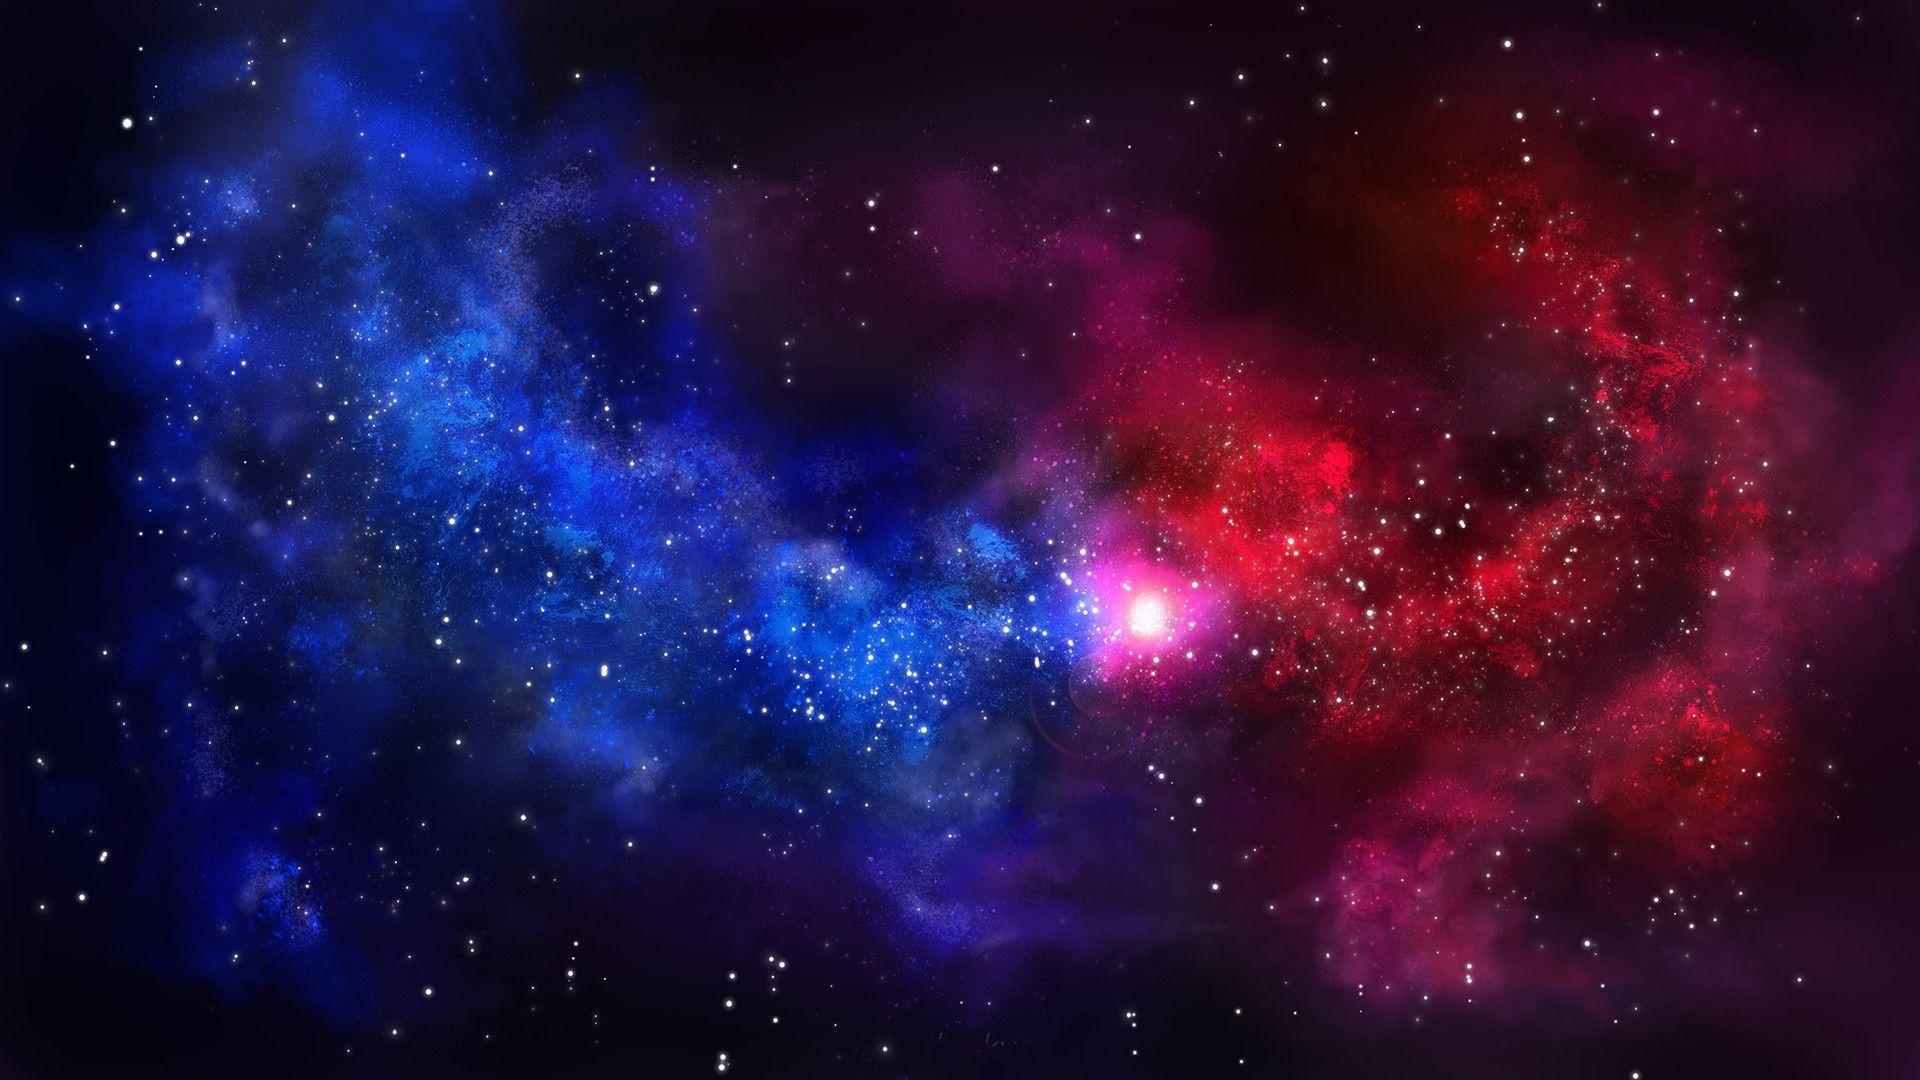 Red And Blue Galaxy Wallpapers Top Free Red And Blue Galaxy